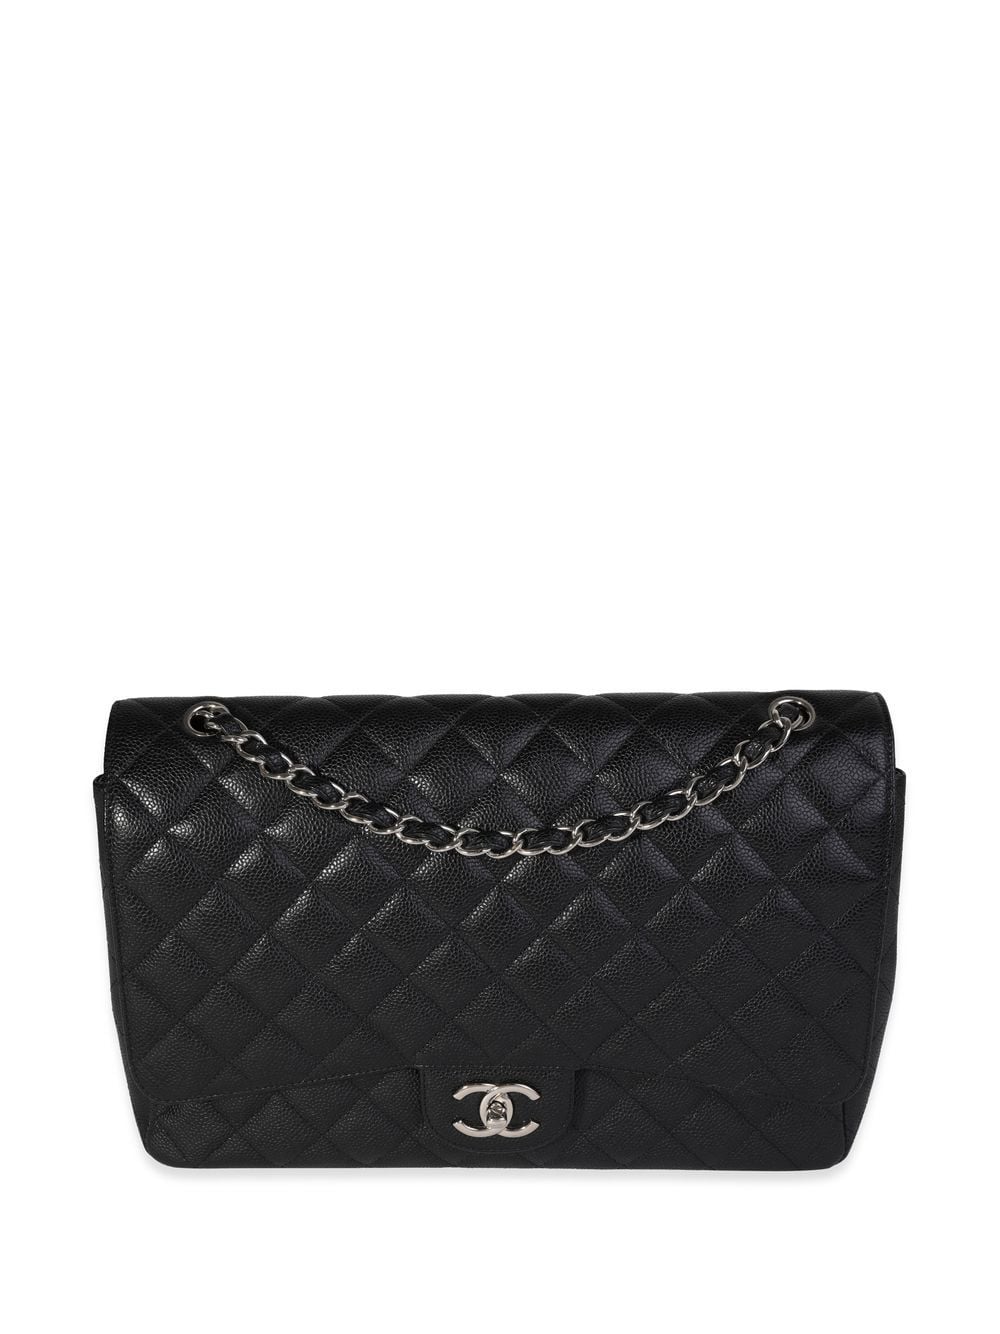 Pre-owned Chanel Double Flap Maxi Shoulder Bag In Black